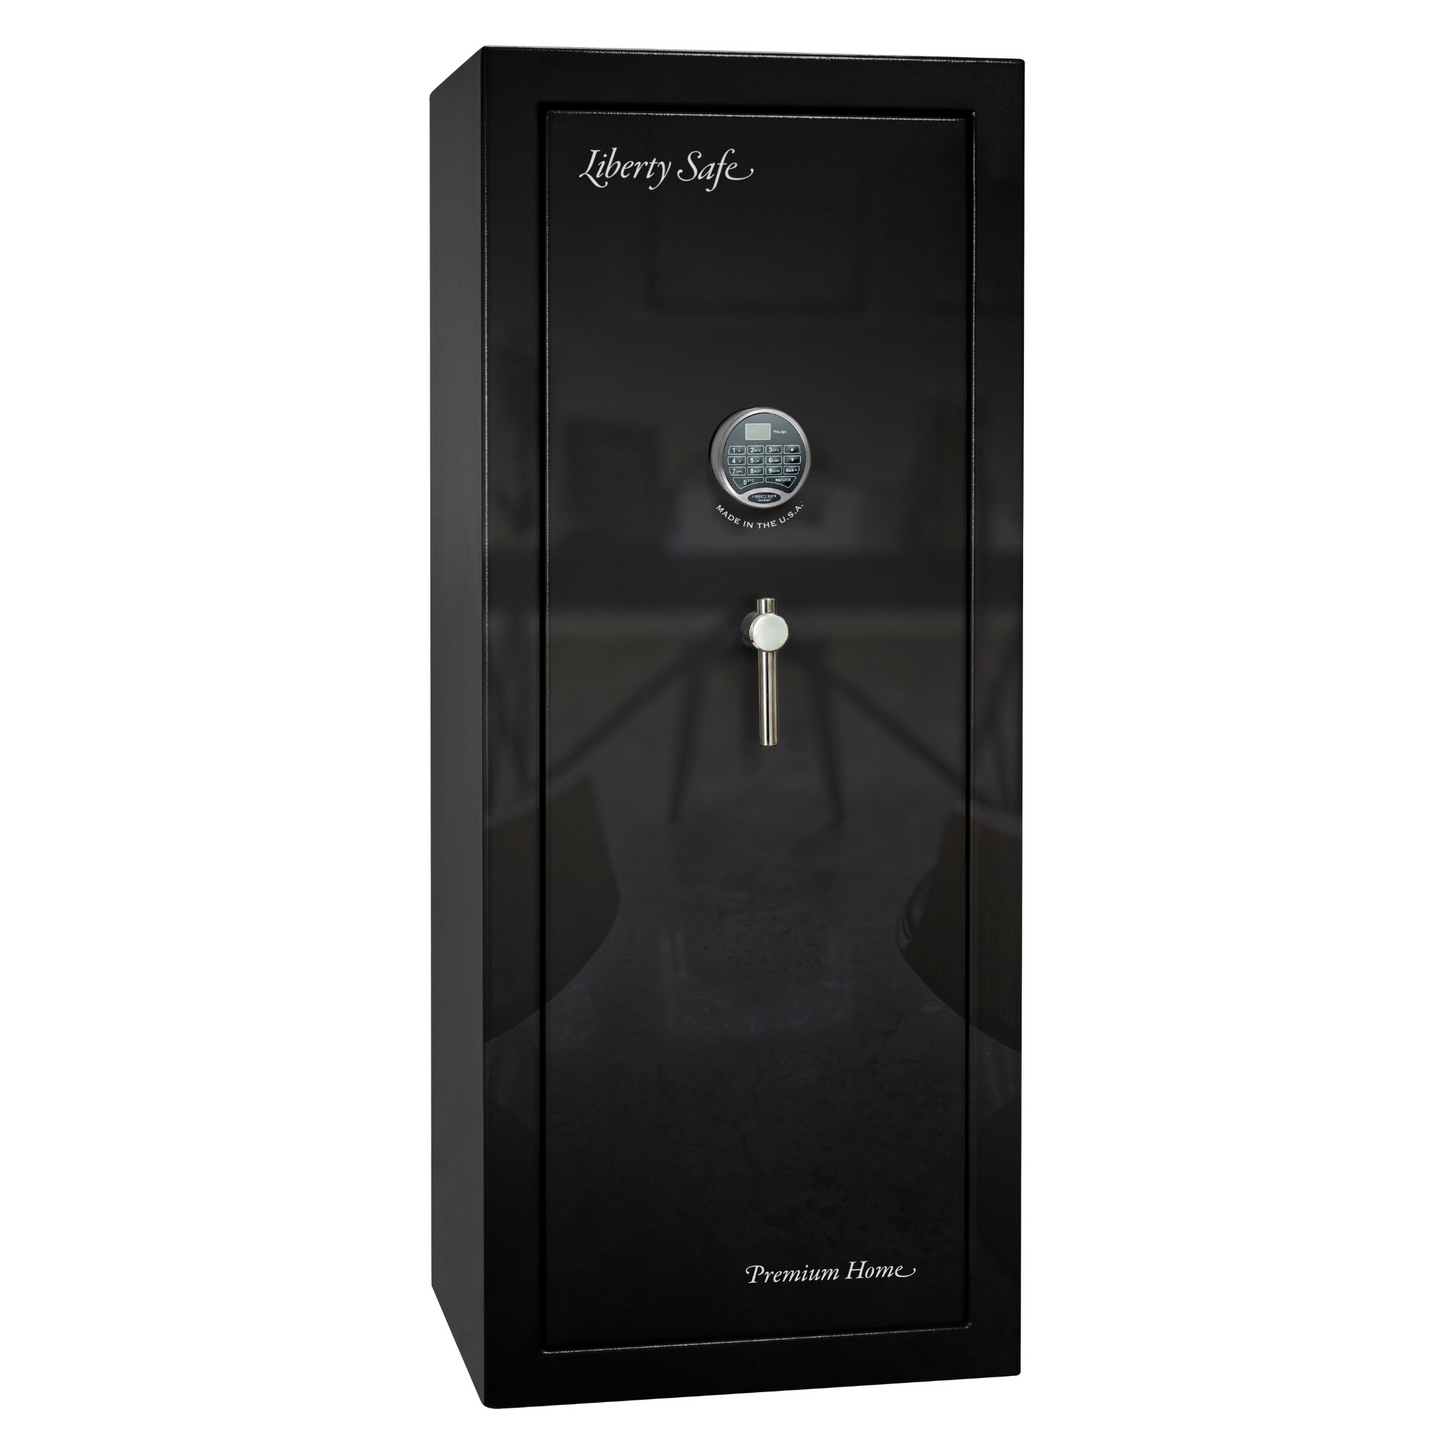 Premium Home Series | Level 7 Security | 2 Hour Fire Protection | 17 | Dimensions: 60.25"(H) x 24.5"(W) x 19"(D) | Black Gloss Chrome - Closed Door